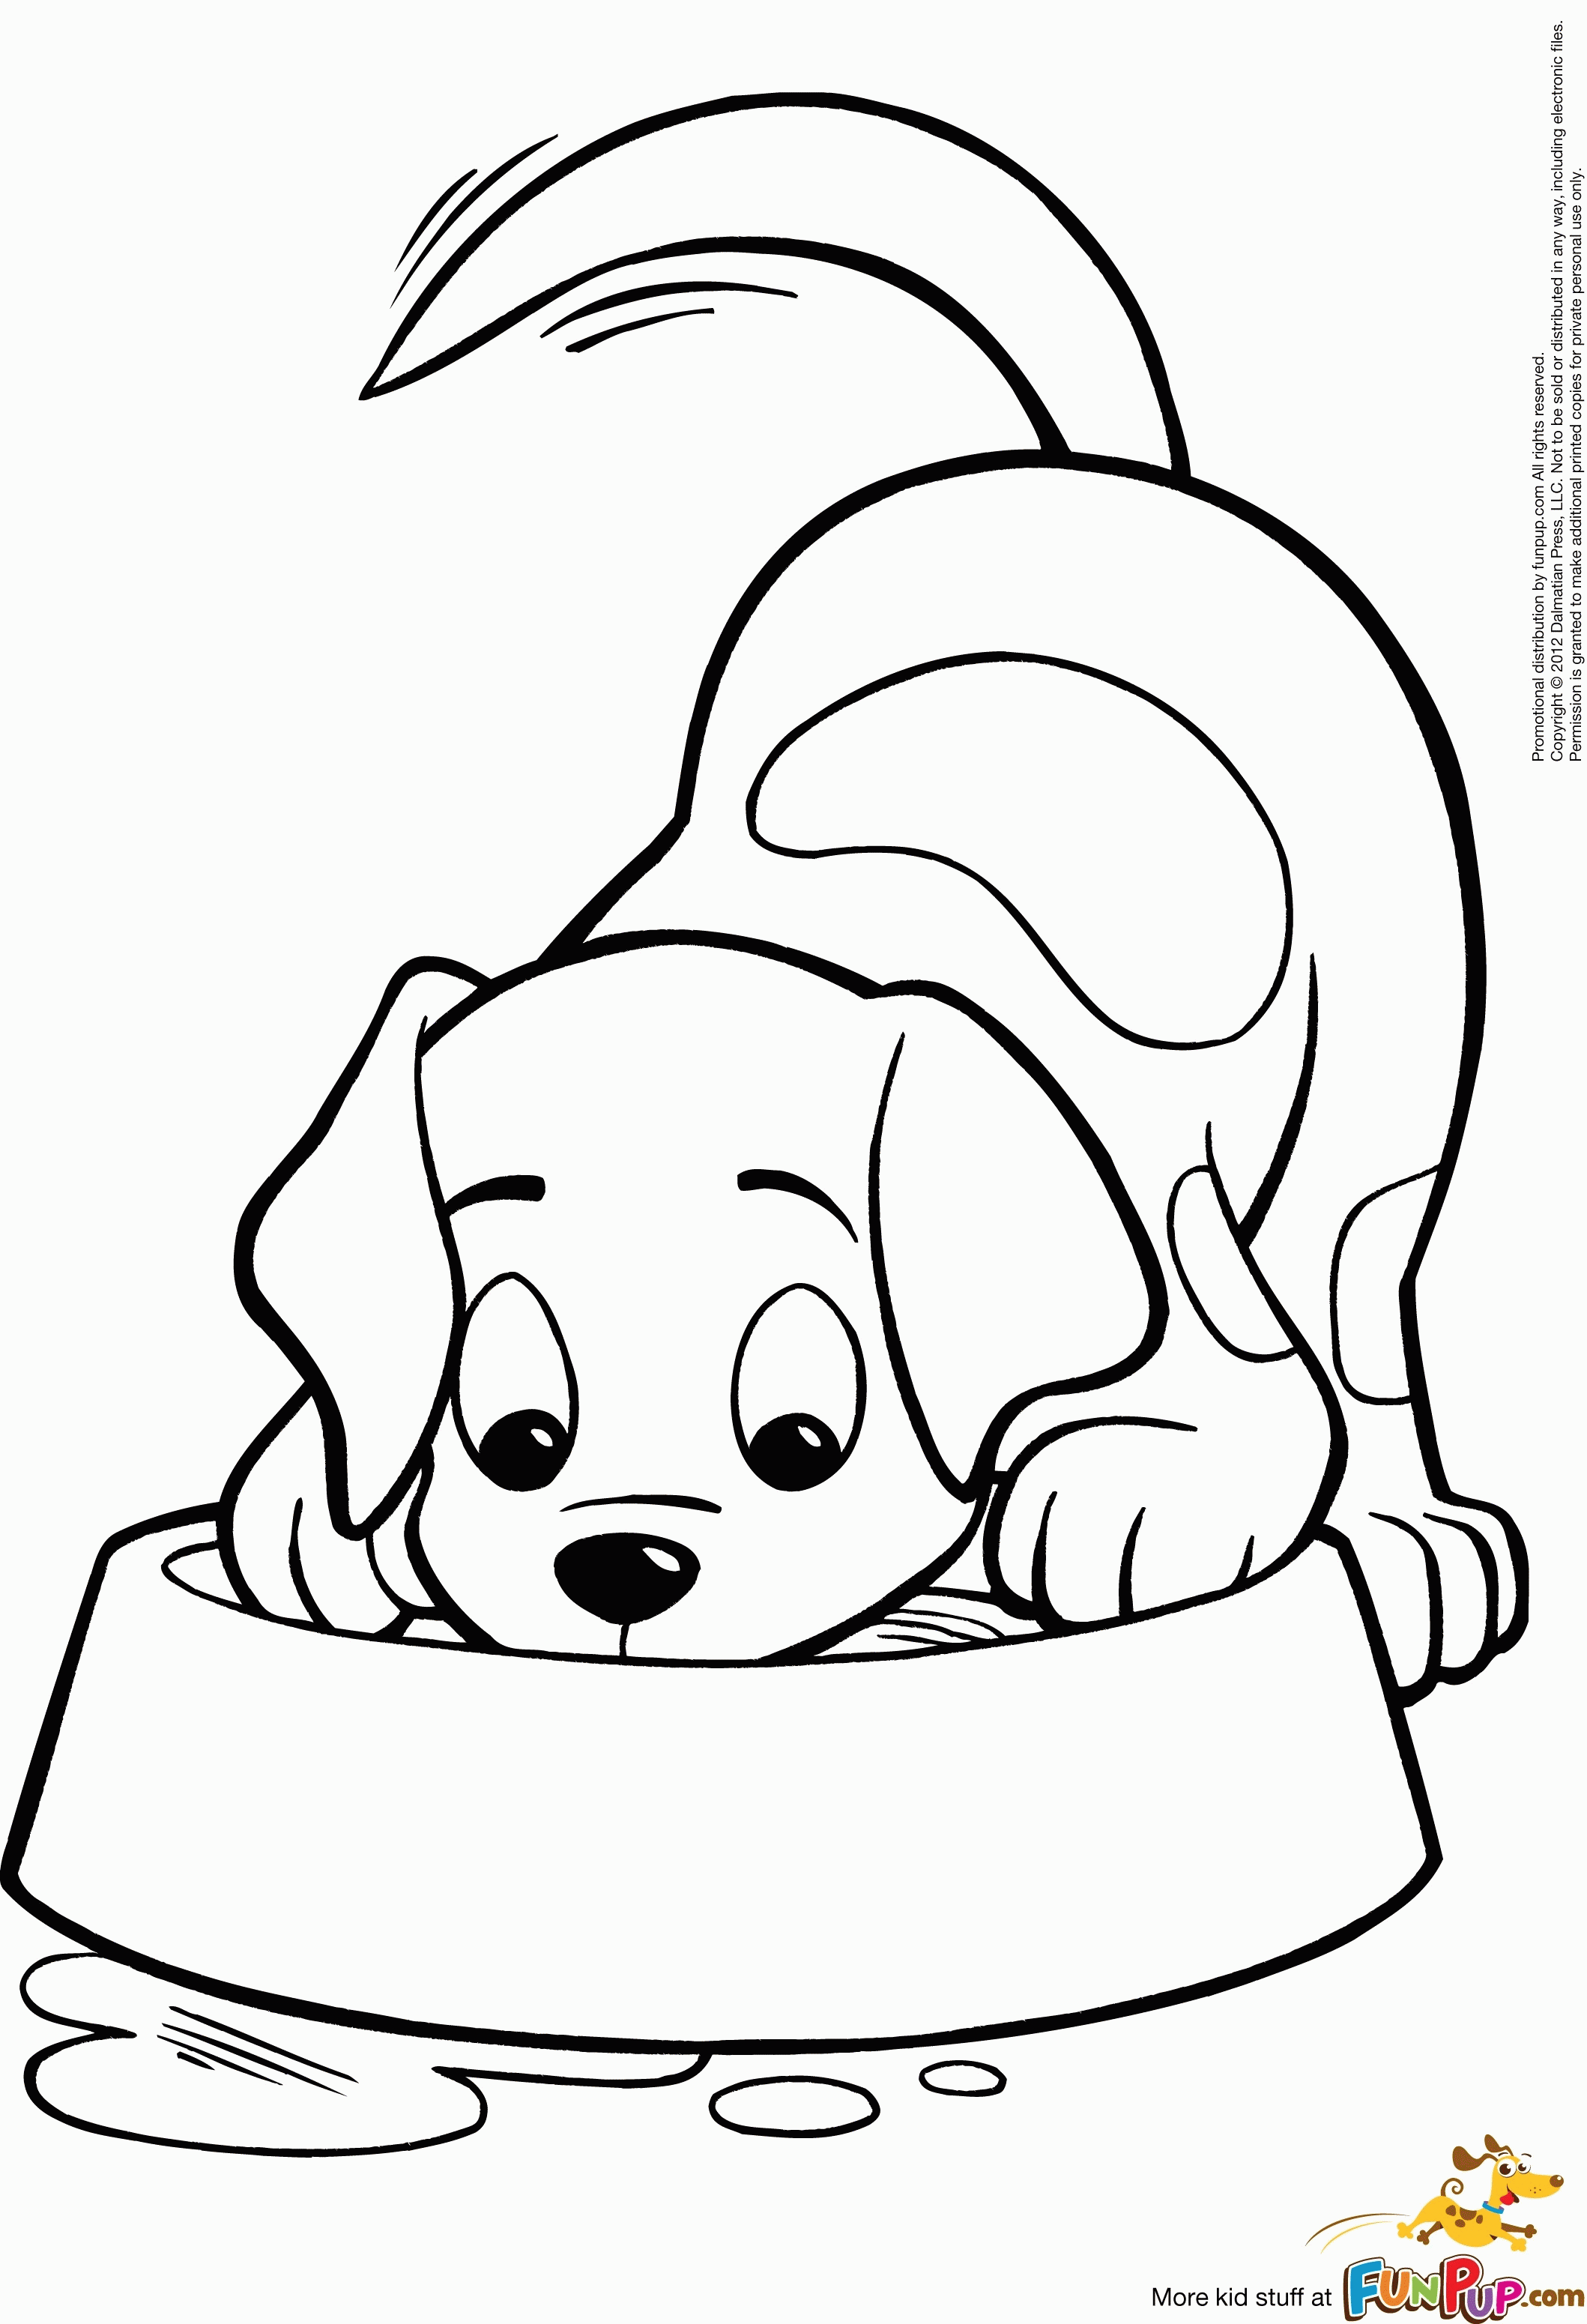 Puppy Colouring Pages Online Puppy Coloring Page Puppy Coloring